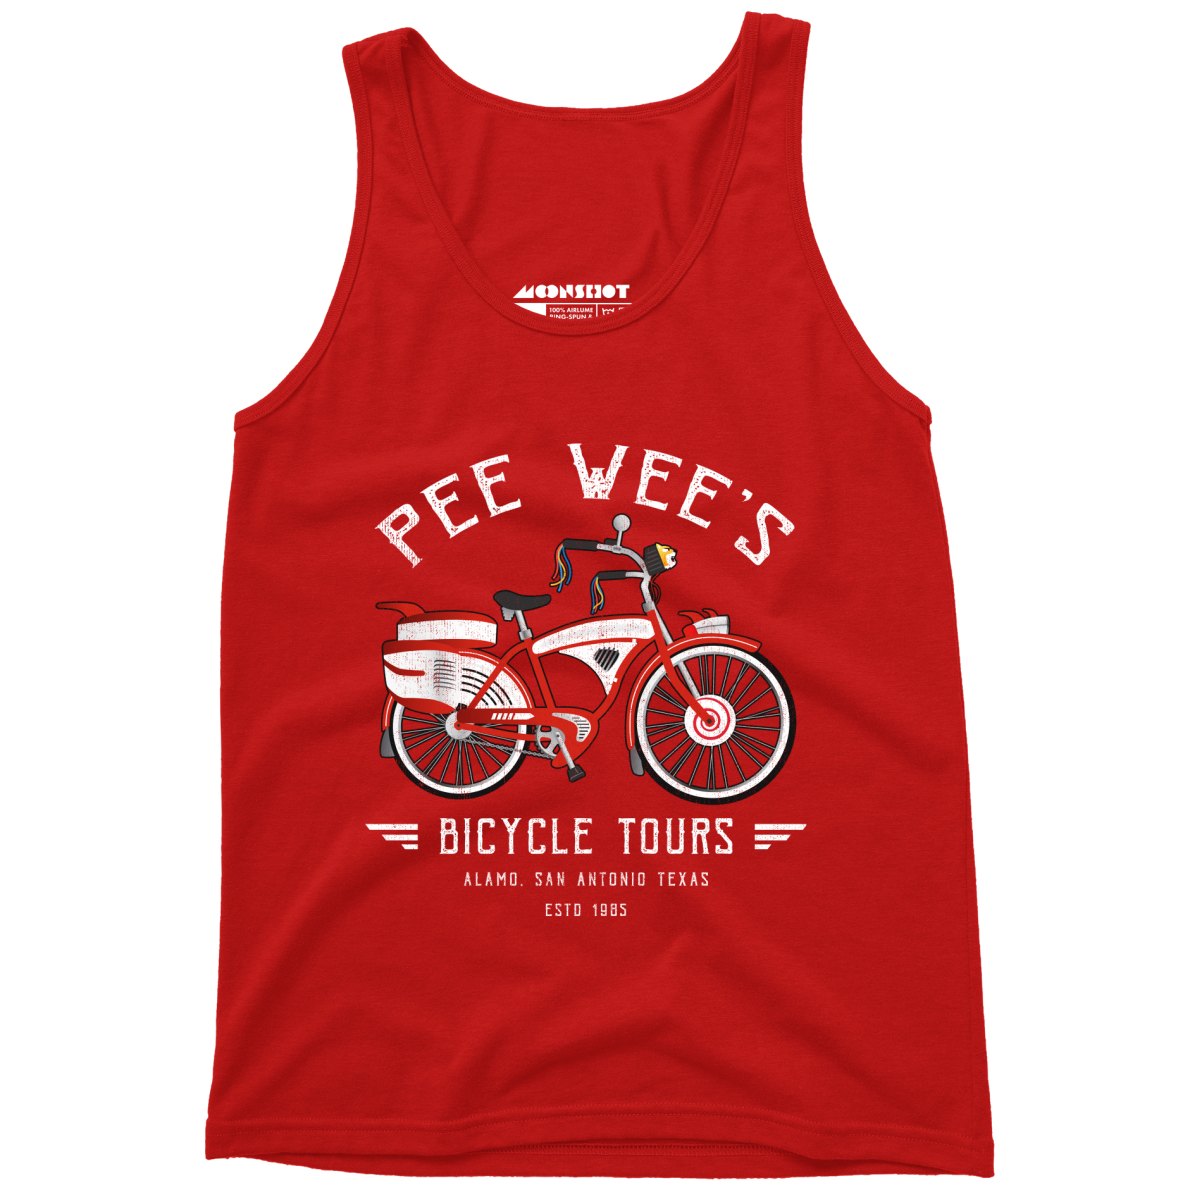 Pee Wee's Bicycle Tours - Unisex Tank Top